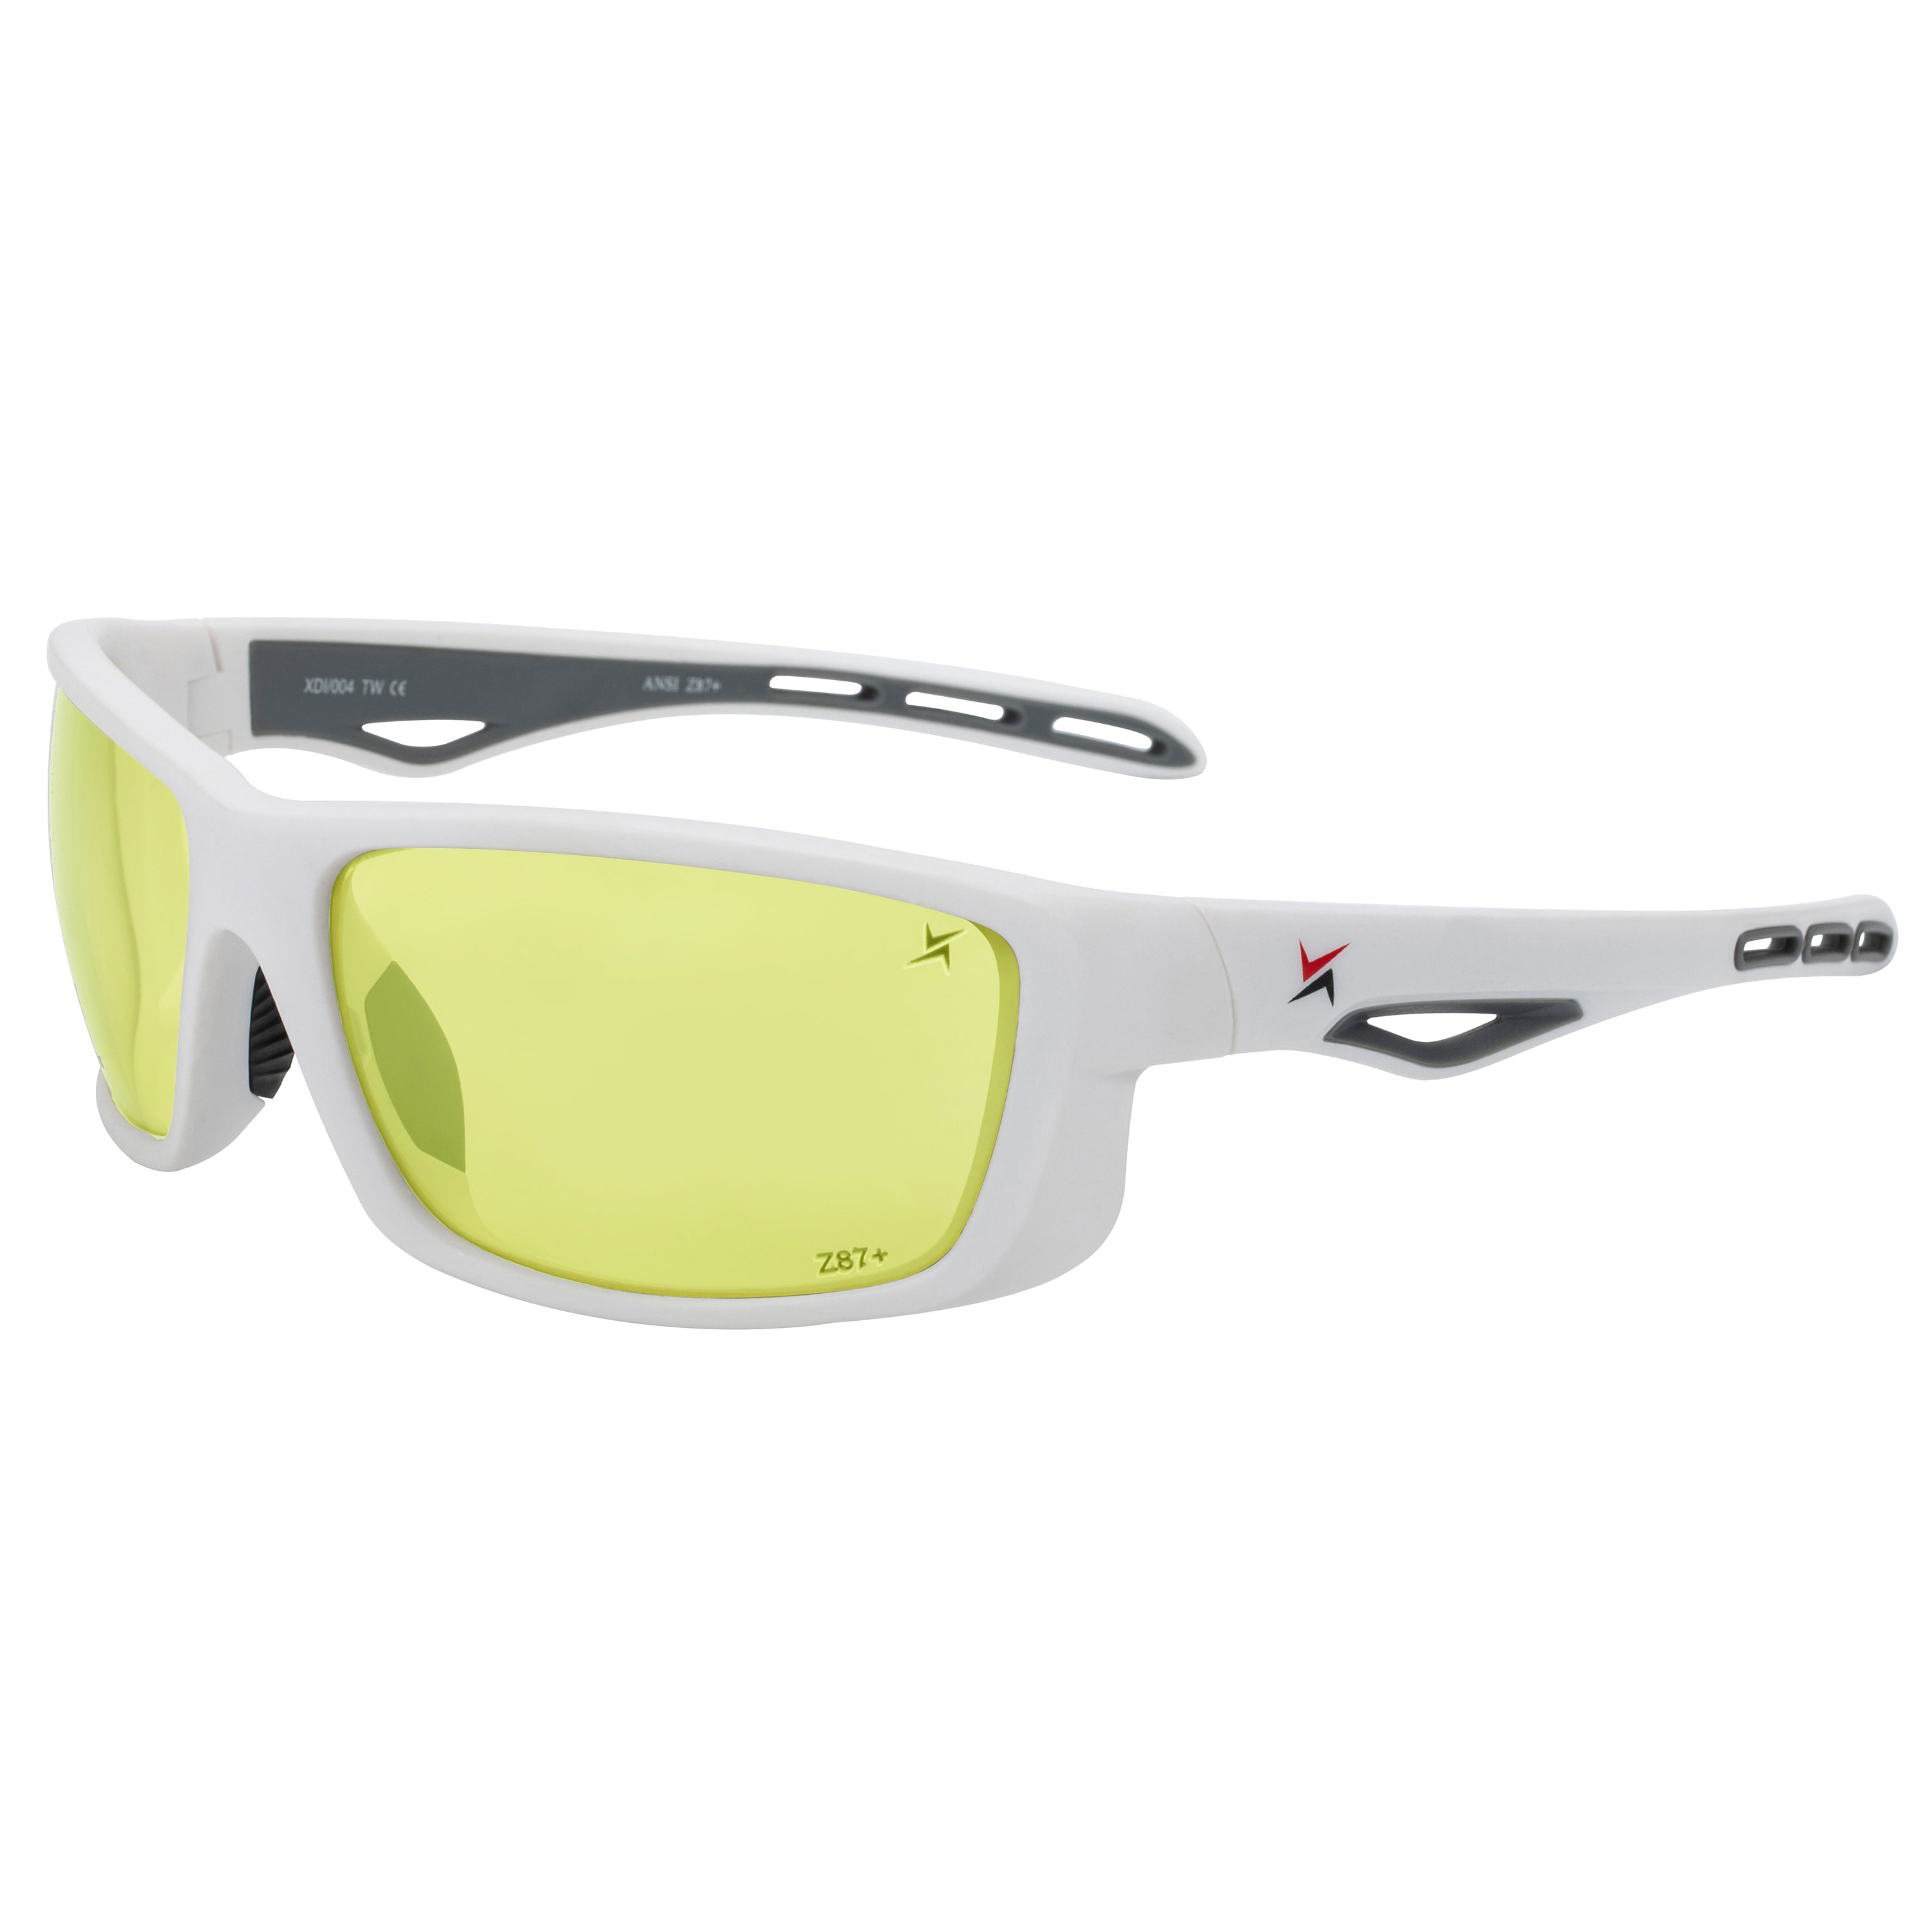 Yellow to Grey Photochromic Lens with Yellow Flash Mirror Coating White Full Frame Wrap Around Sport Safety Sunglasses.